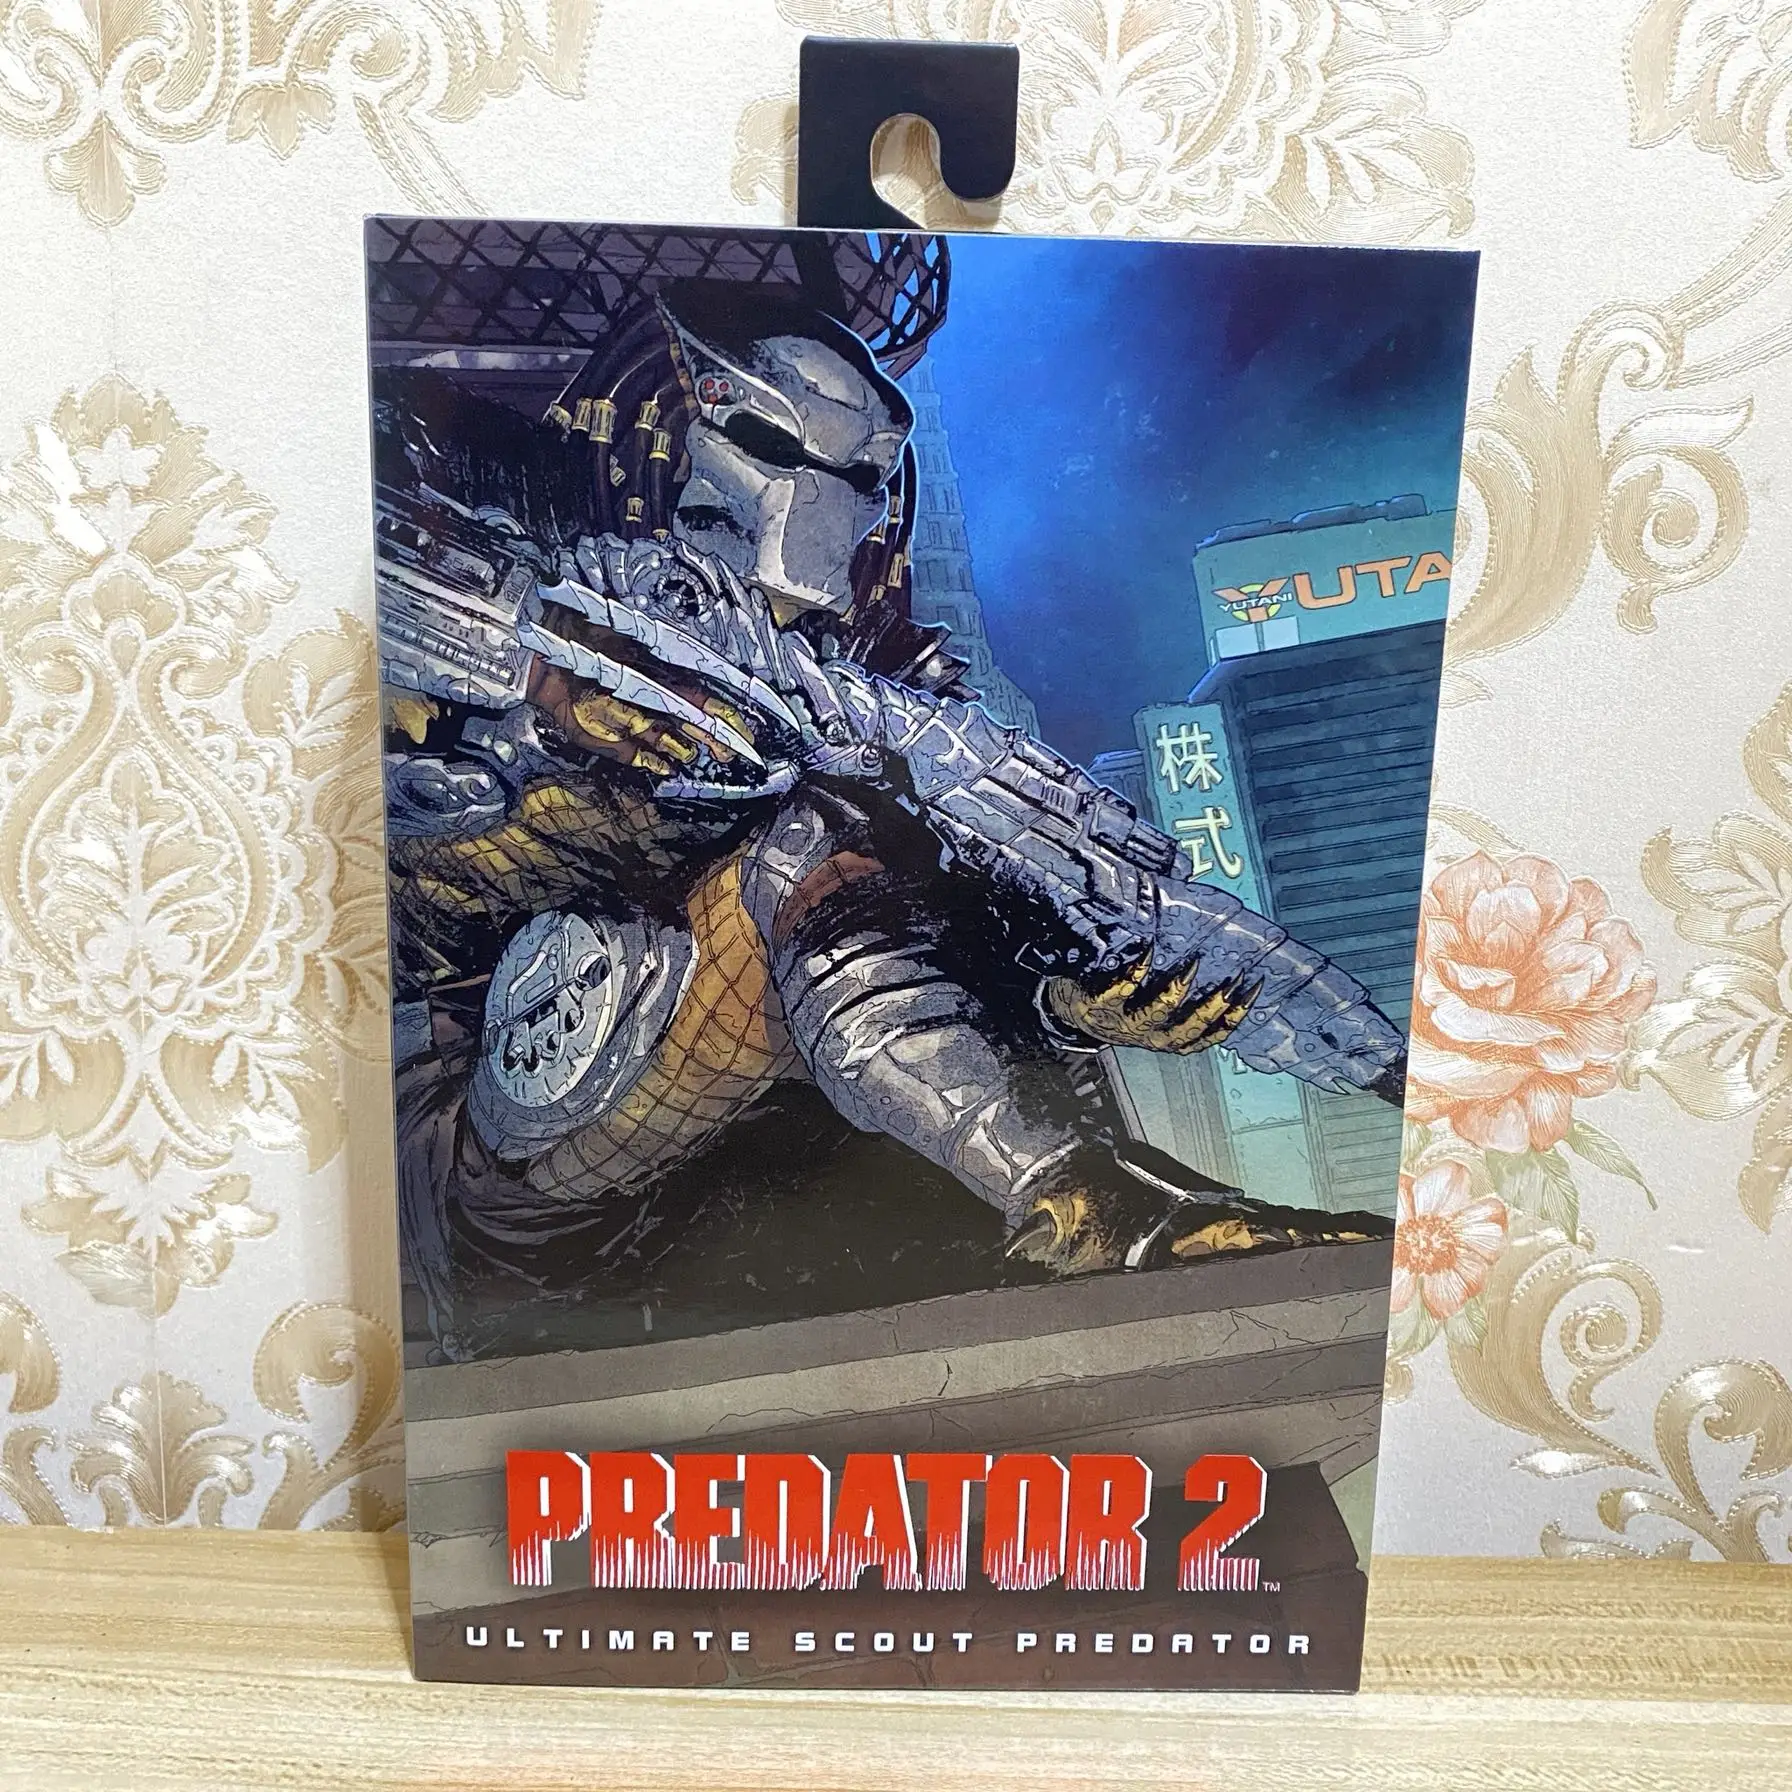 

NECA Original Predator City Hunter scout Ultimate Emissary Action Figure Toy Brinquedos Figurals Collection Model Gift